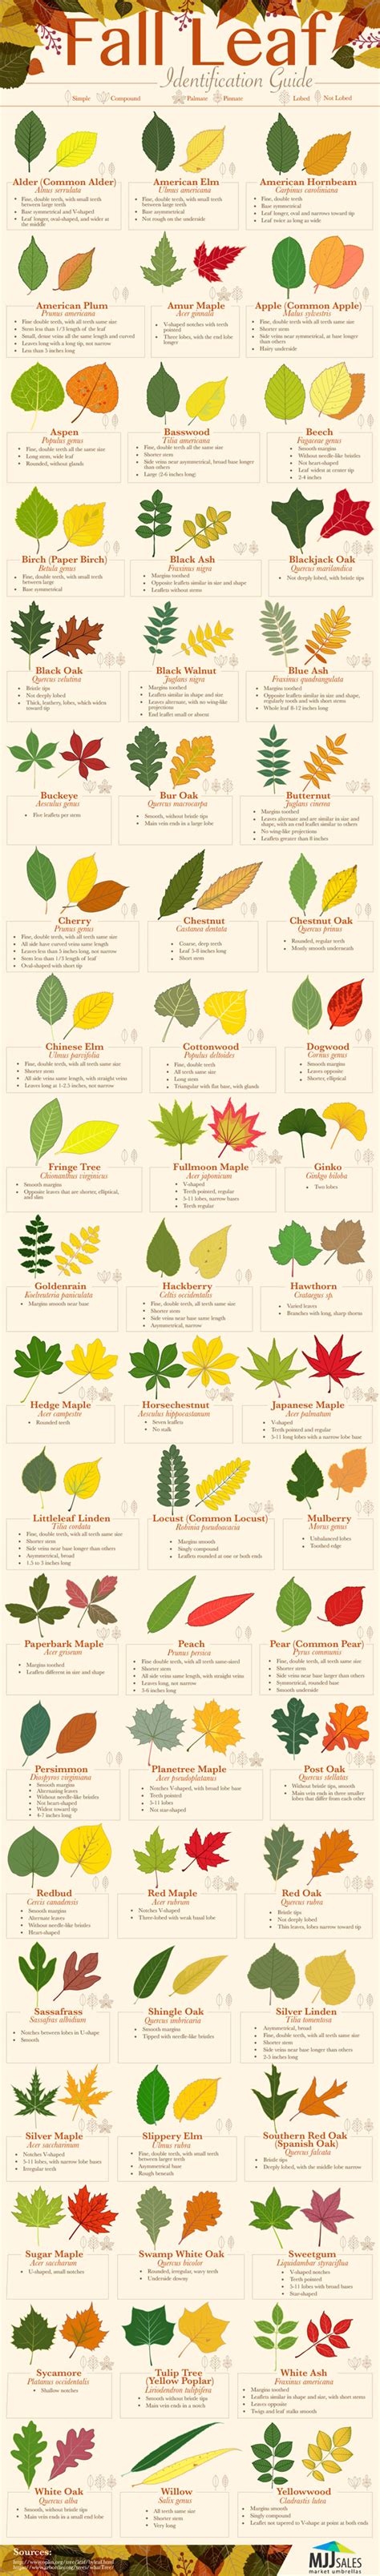 Fall Leaf Identification Guide Best Infographics